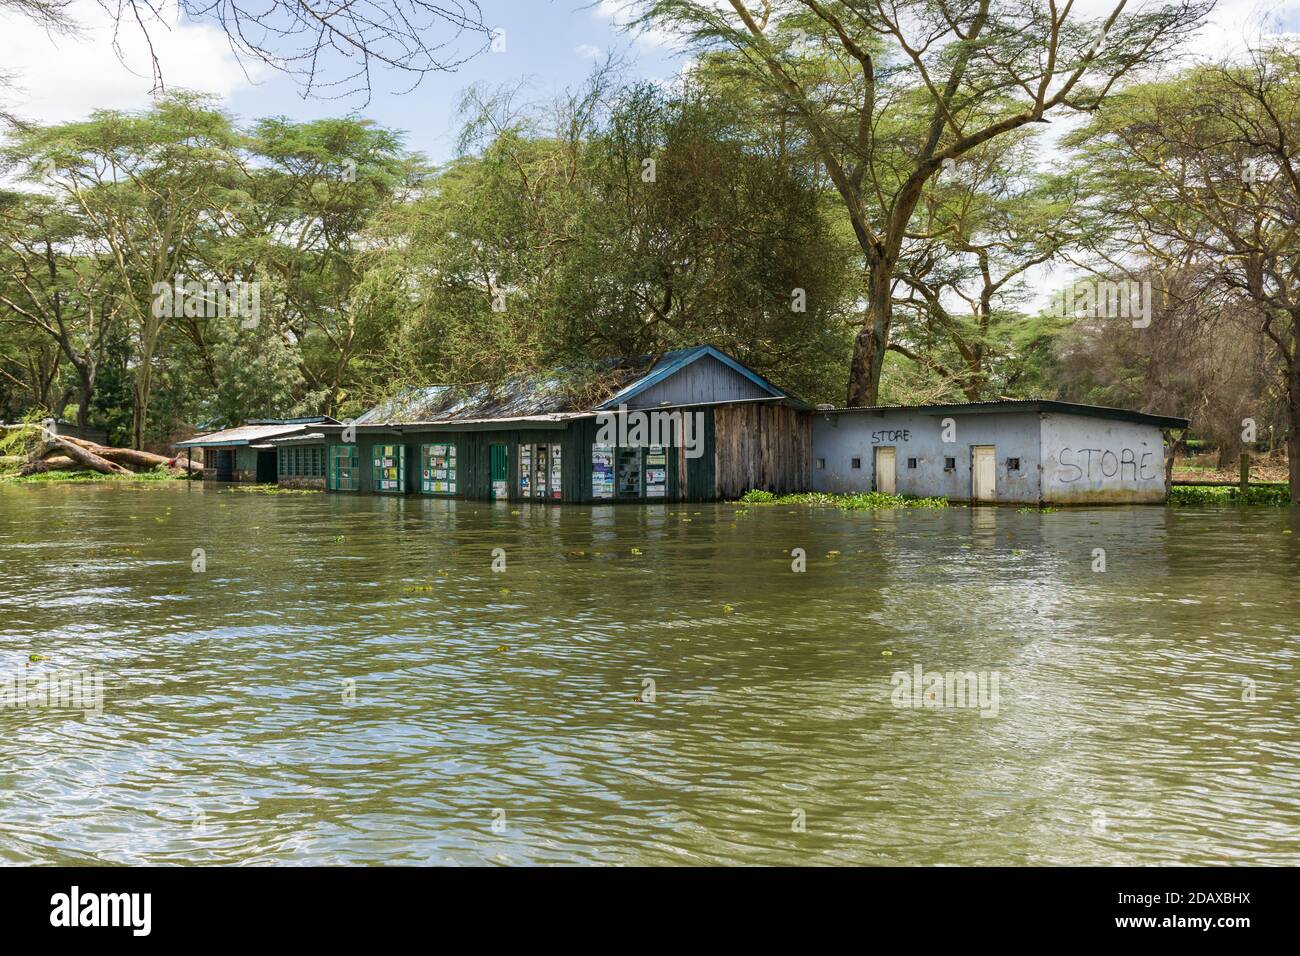 Several buildings partially submerged due to rising water levels, lake Naivasha, Kenya, East Africa Stock Photo